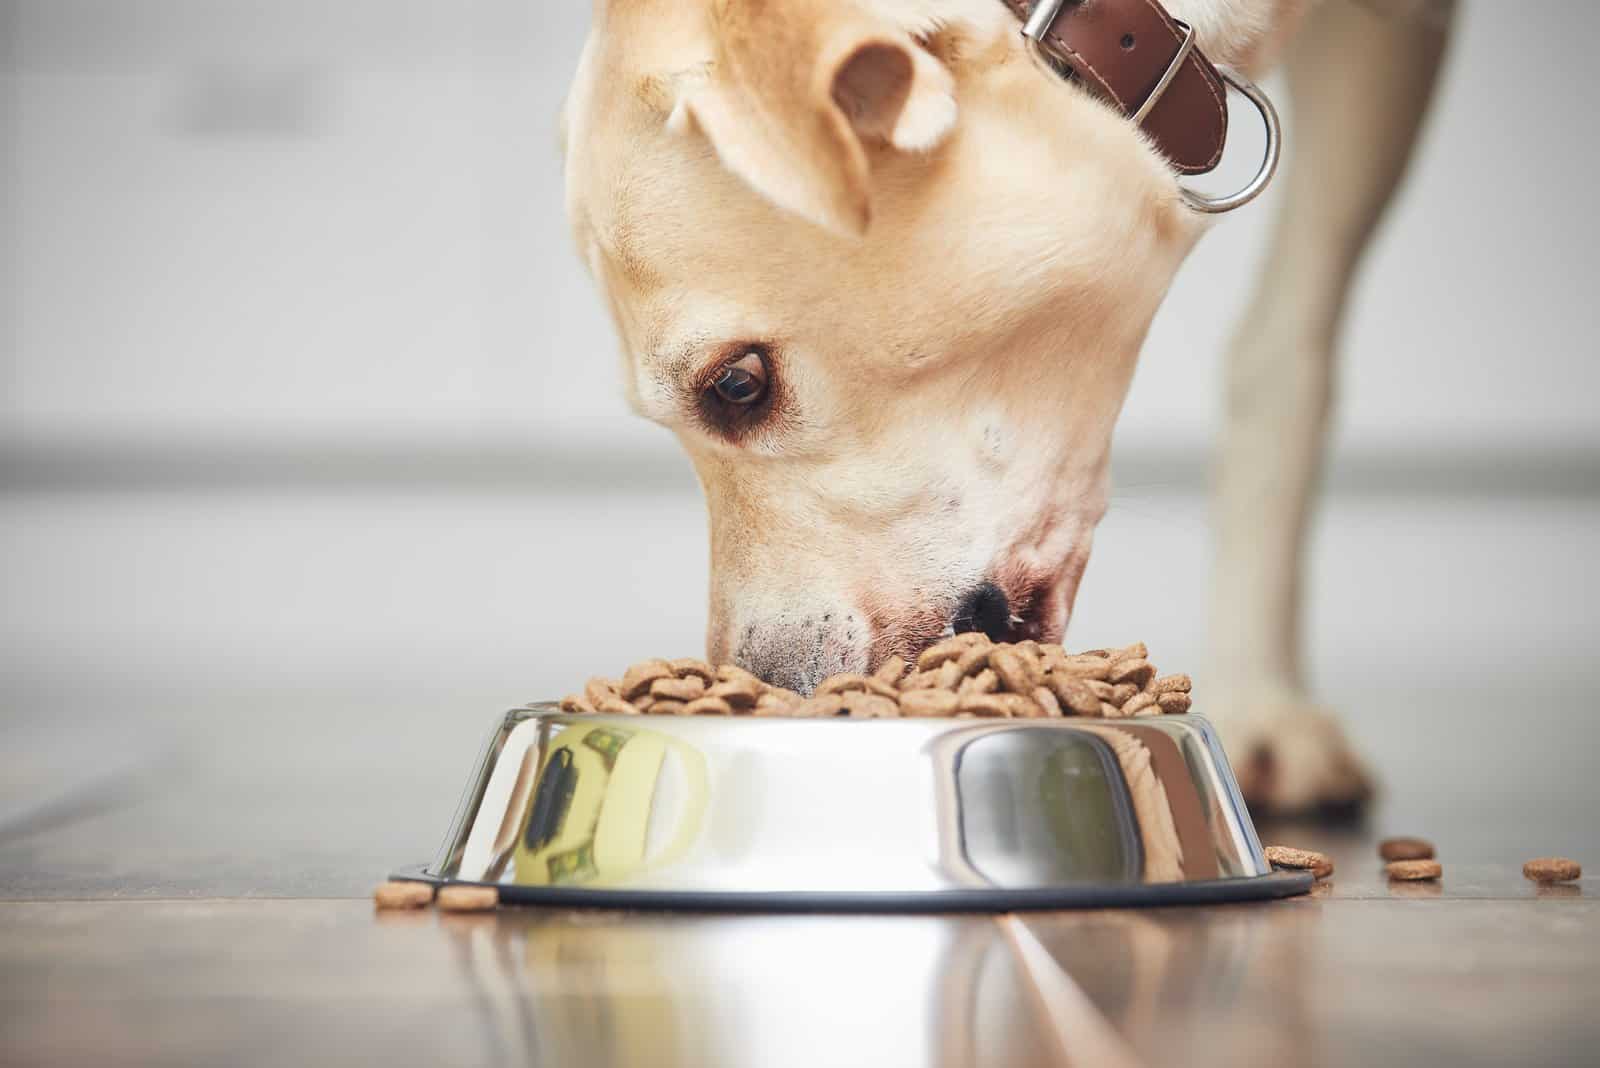 labrador dog eating from a bowl on the floor